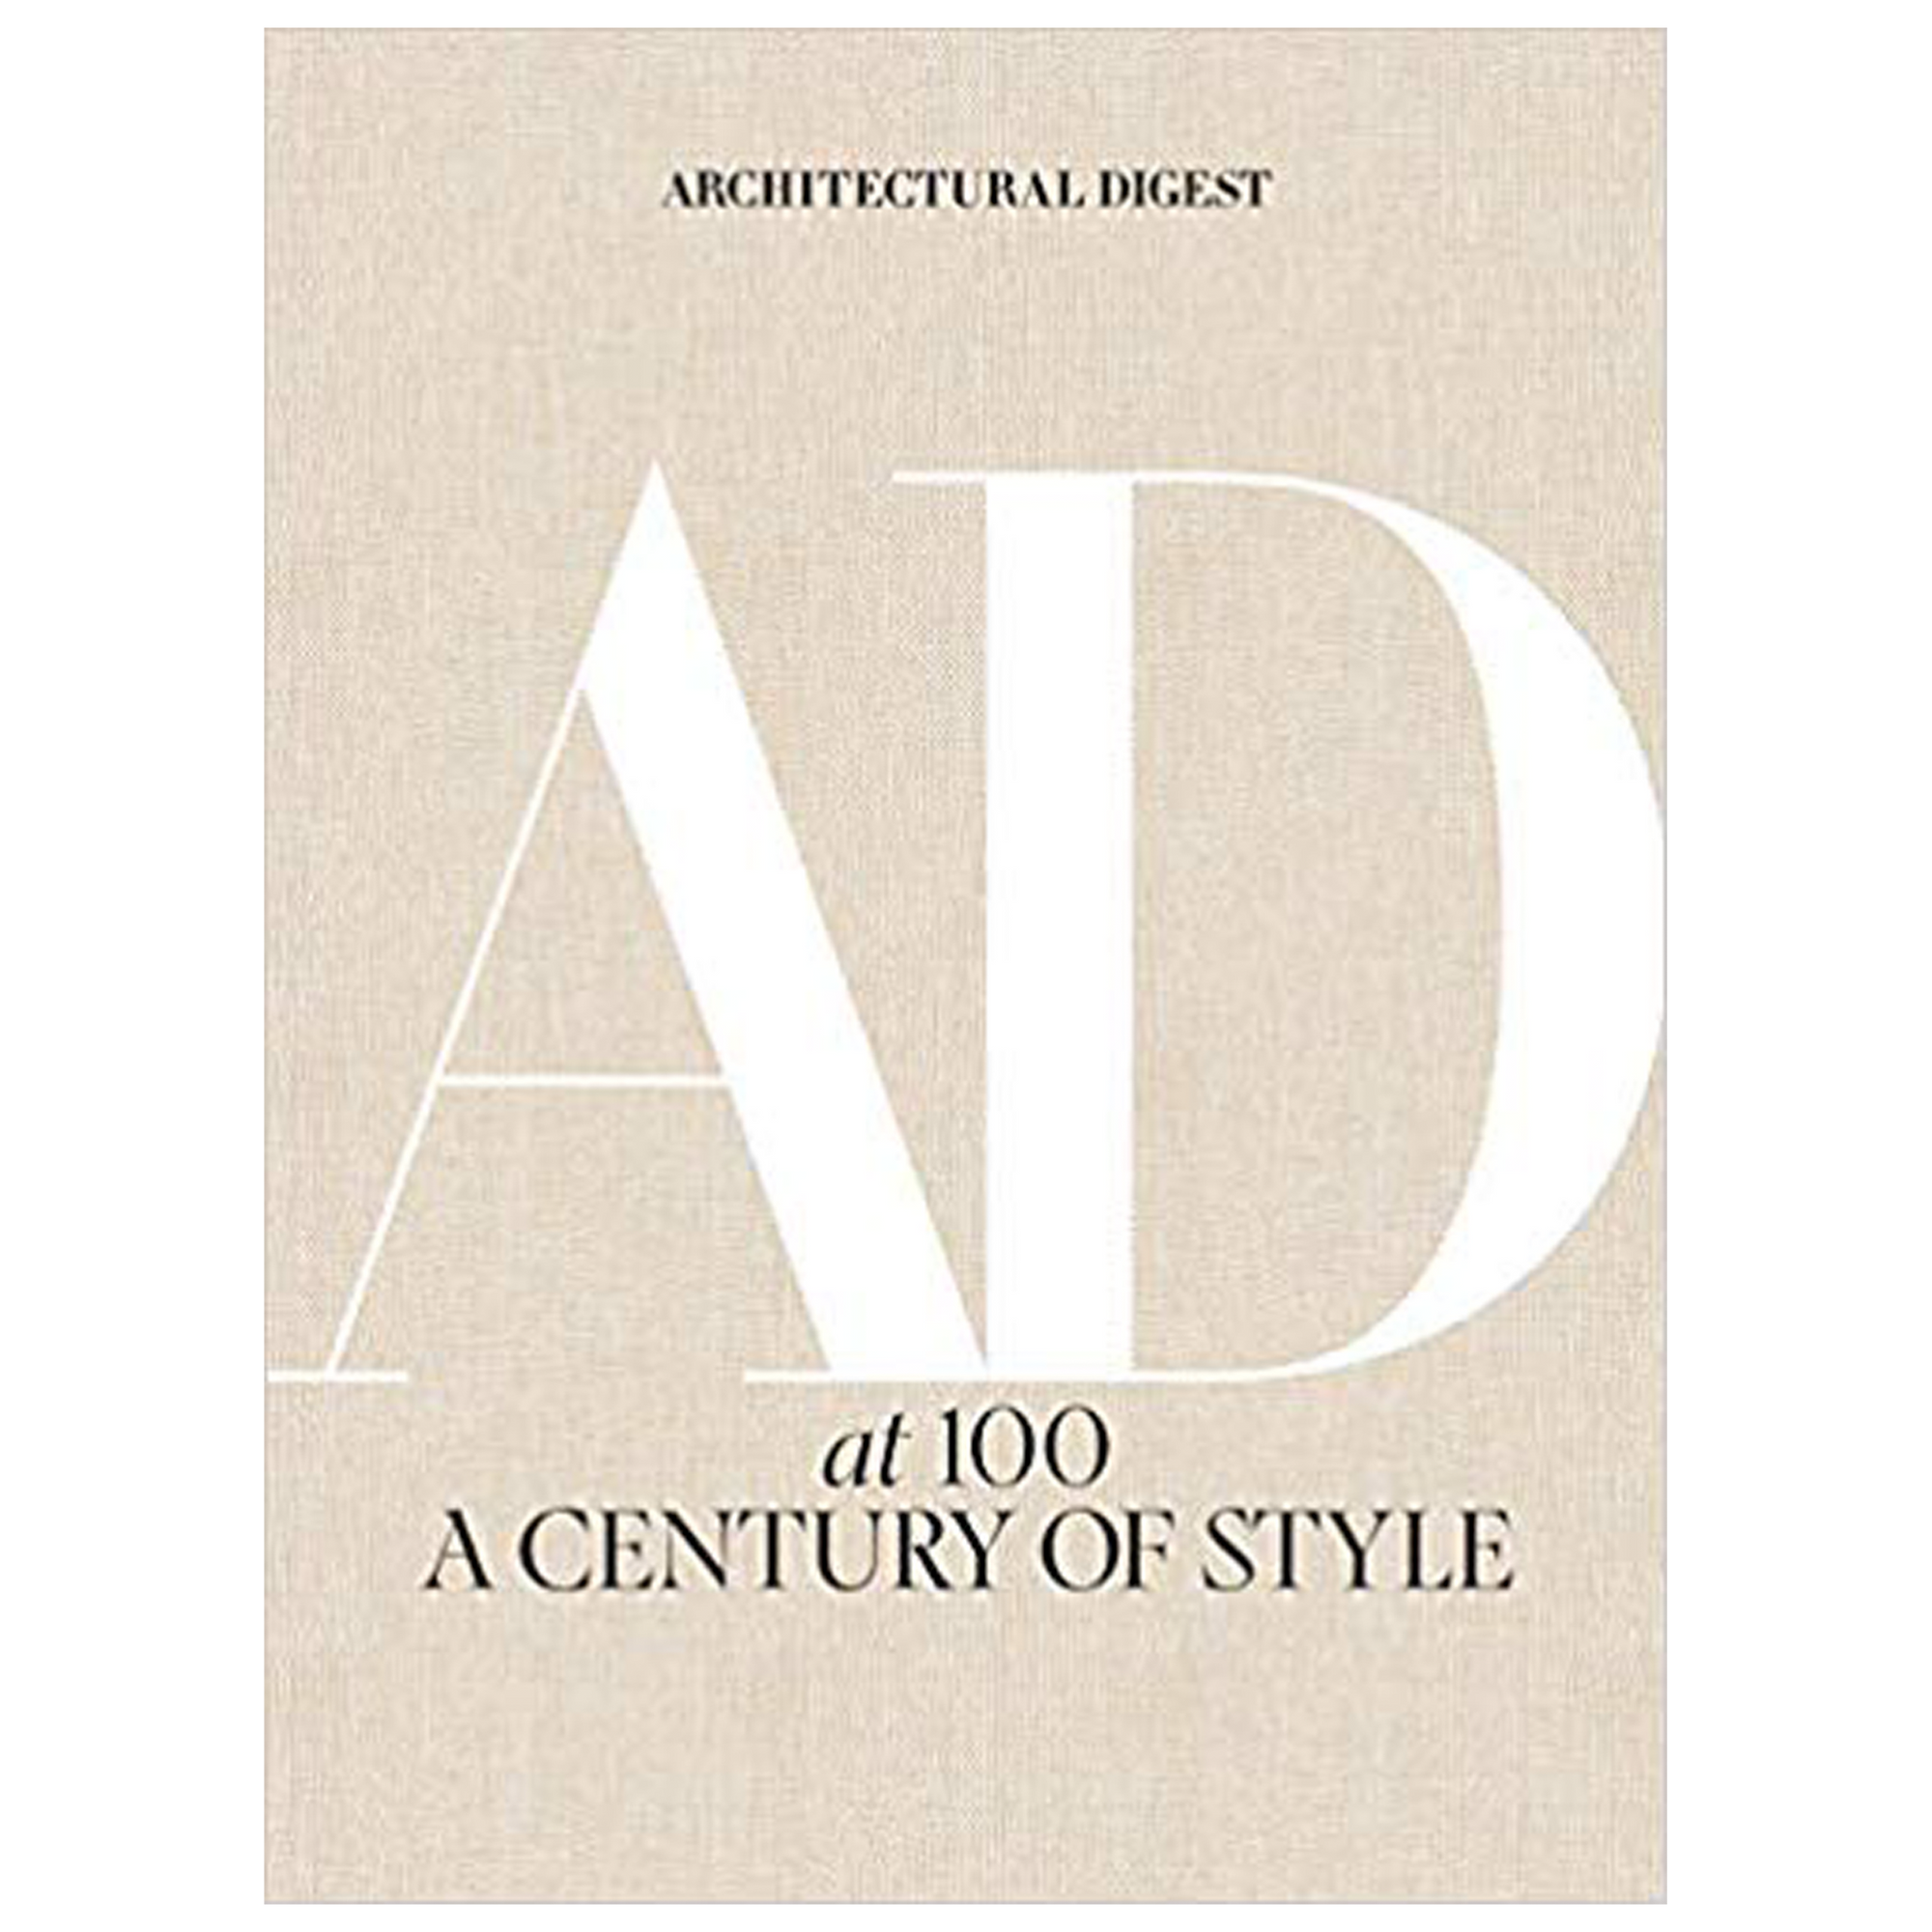 Architectural Digest at 100 celebrates the best from the pages of the international design authority.